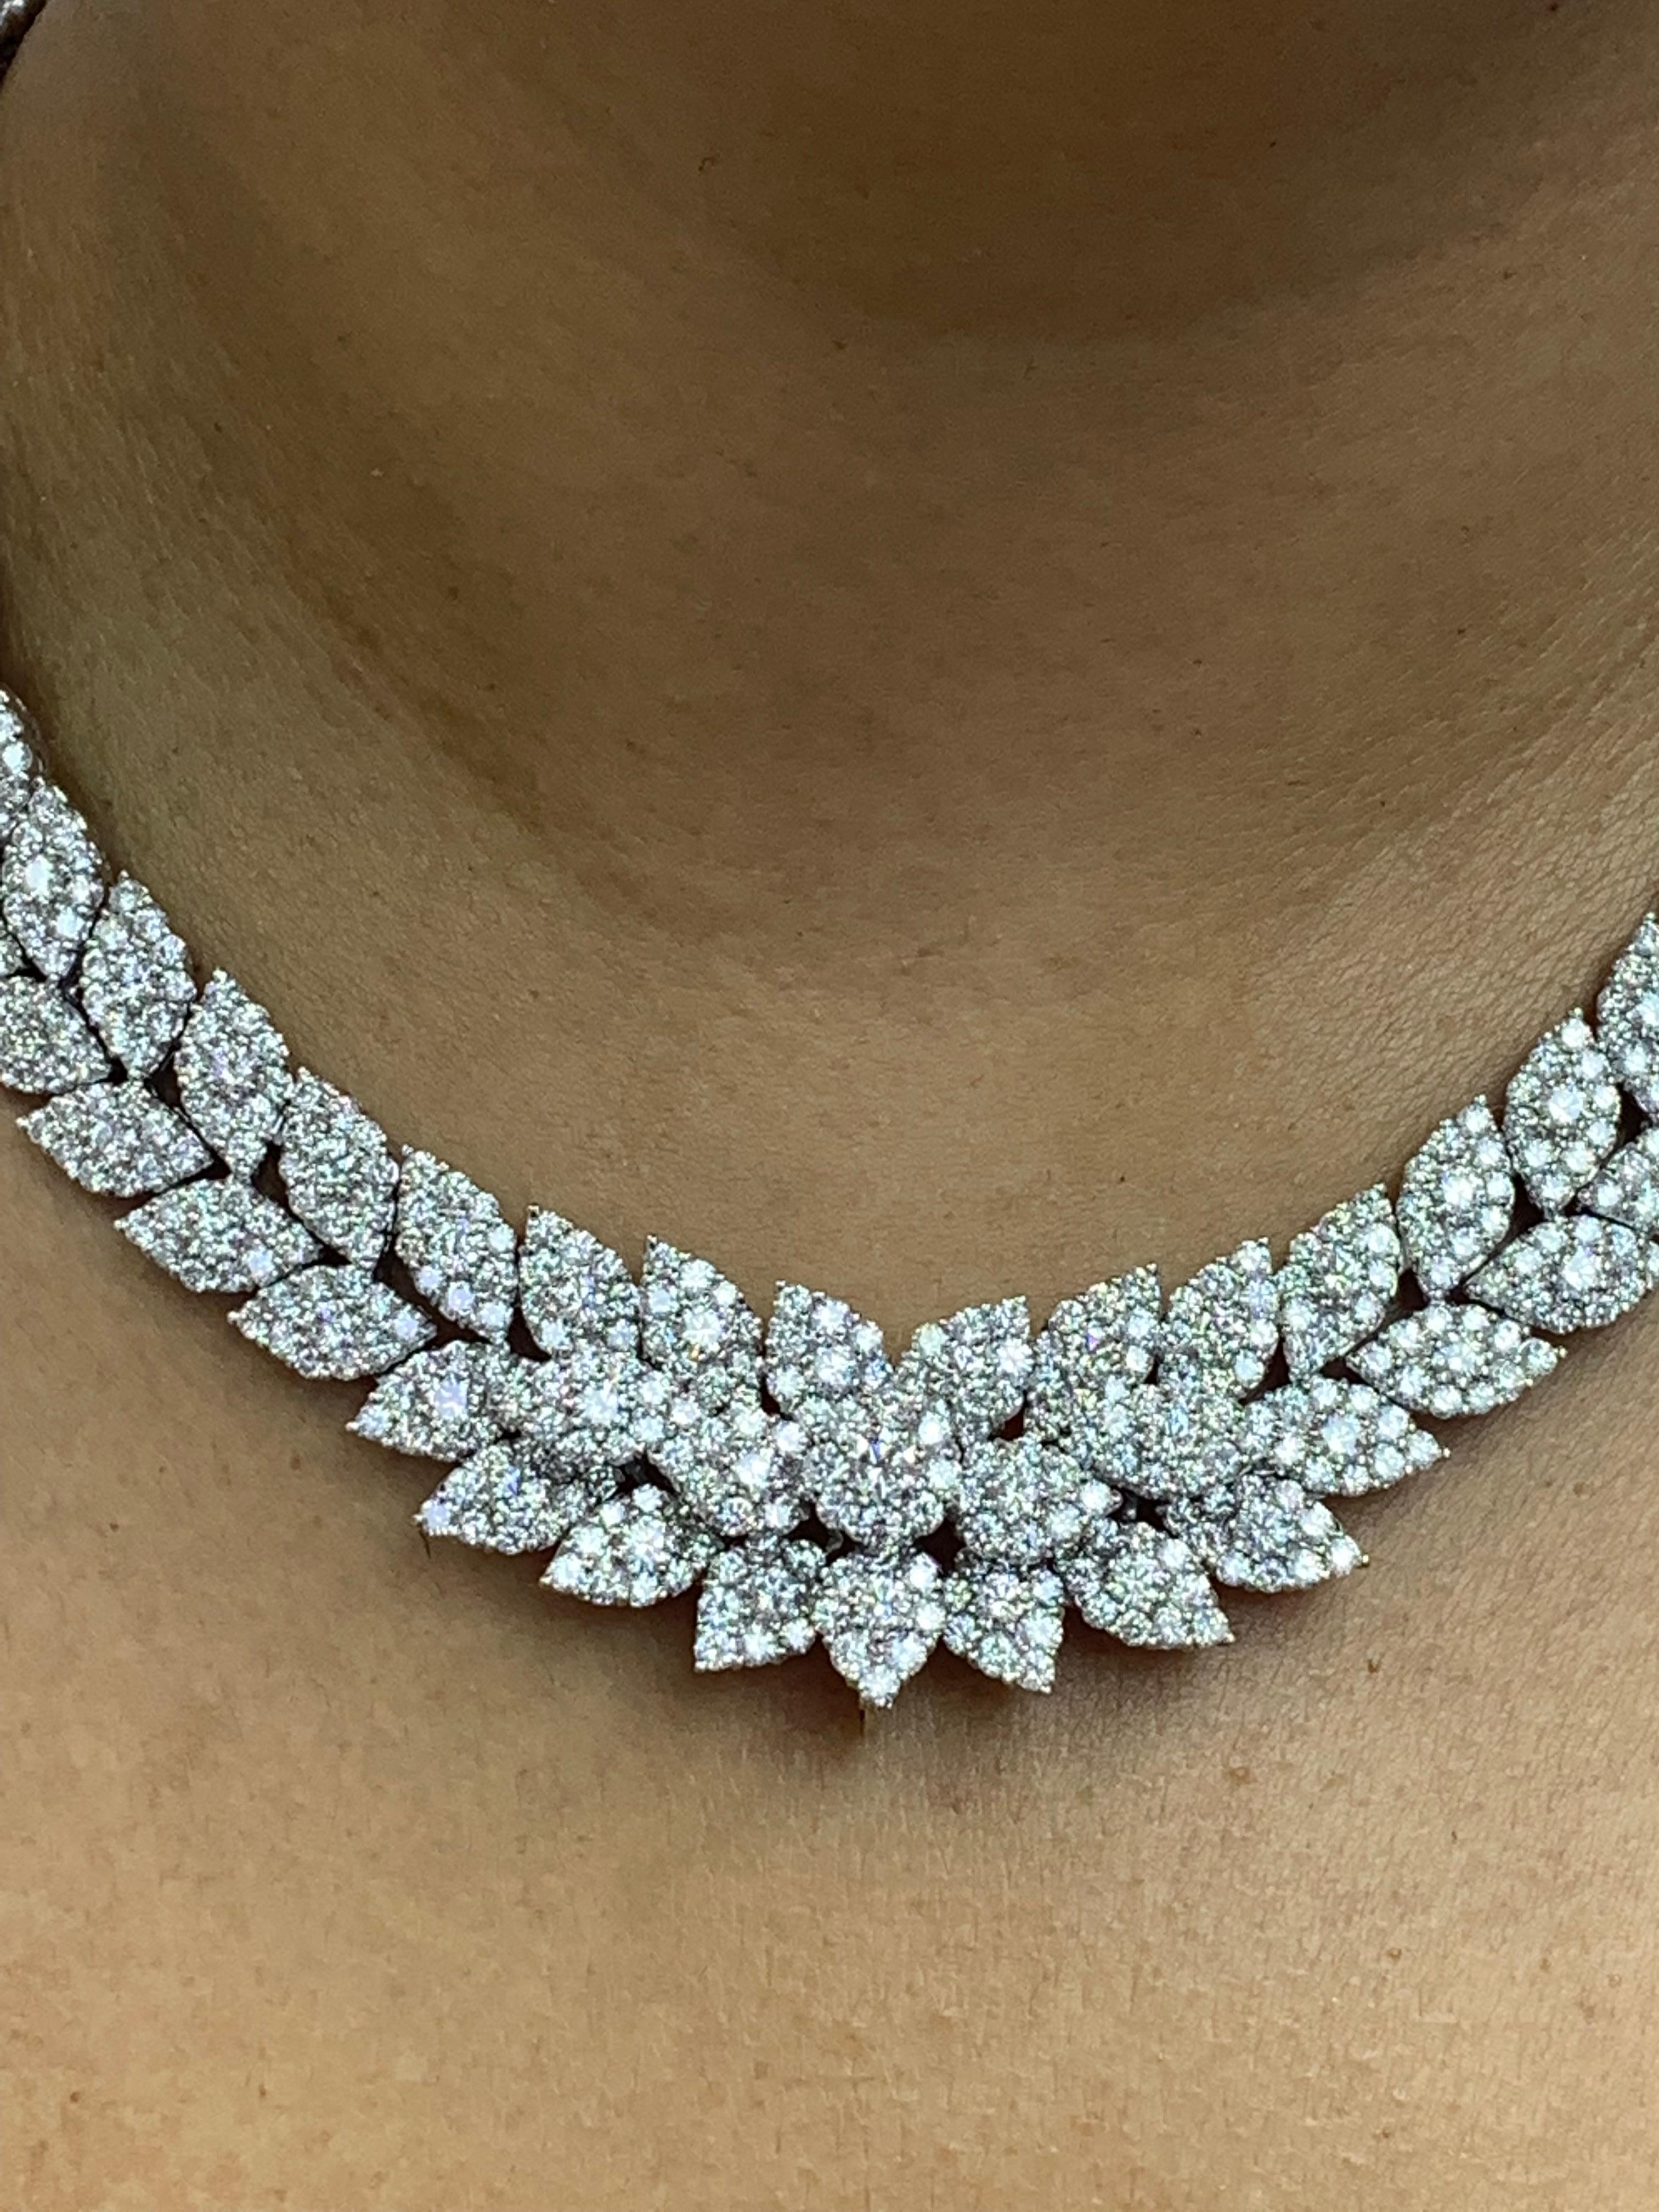 39.58 Carat Cluster Diamond Necklace in 18K White Gold For Sale 7